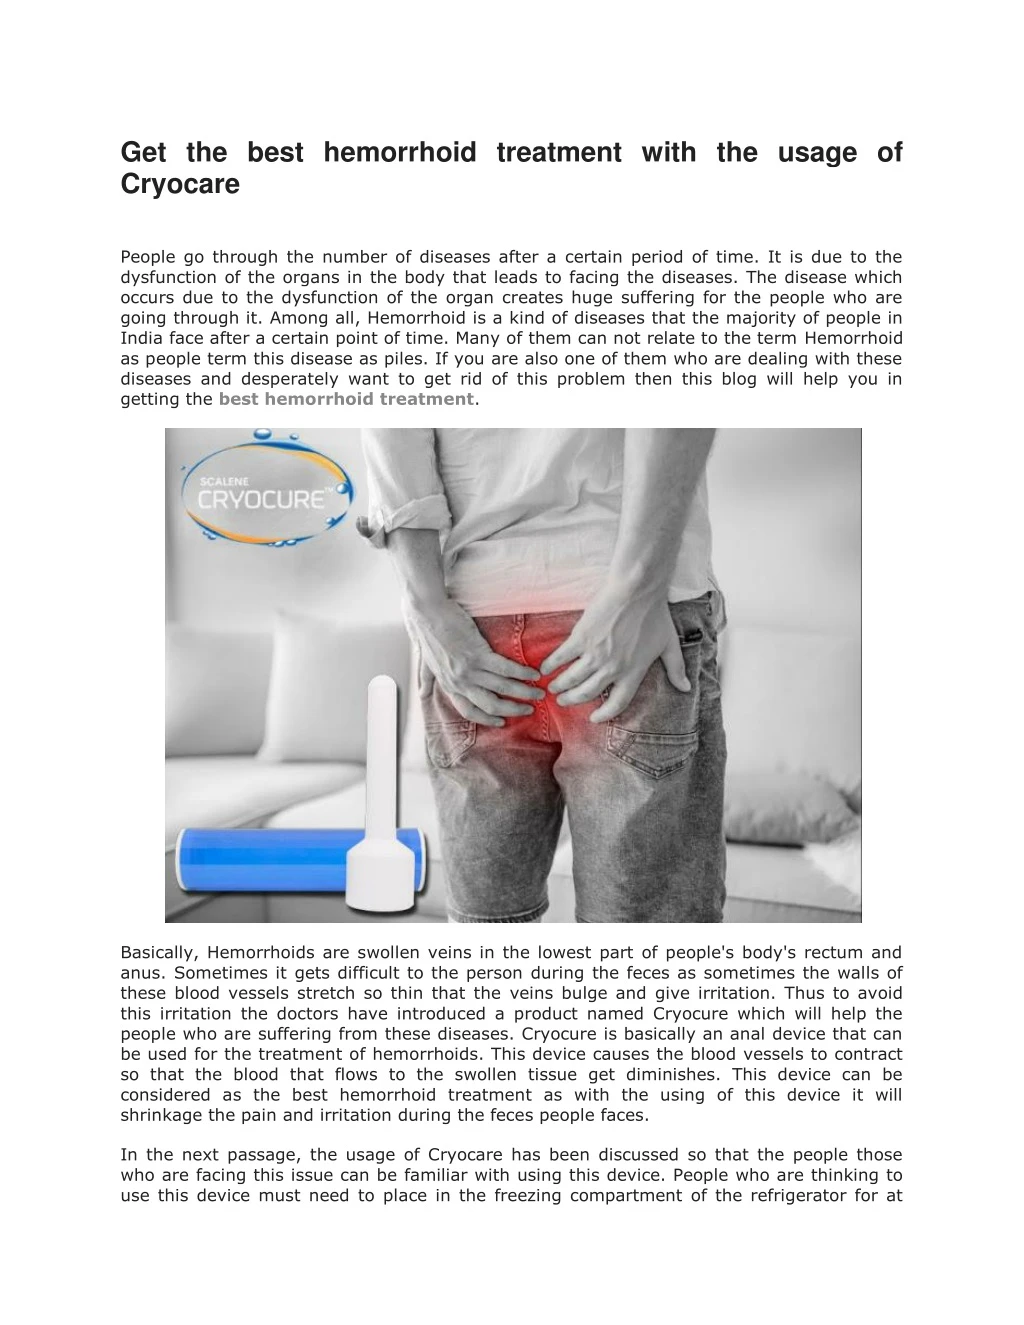 get the best hemorrhoid treatment with the usage